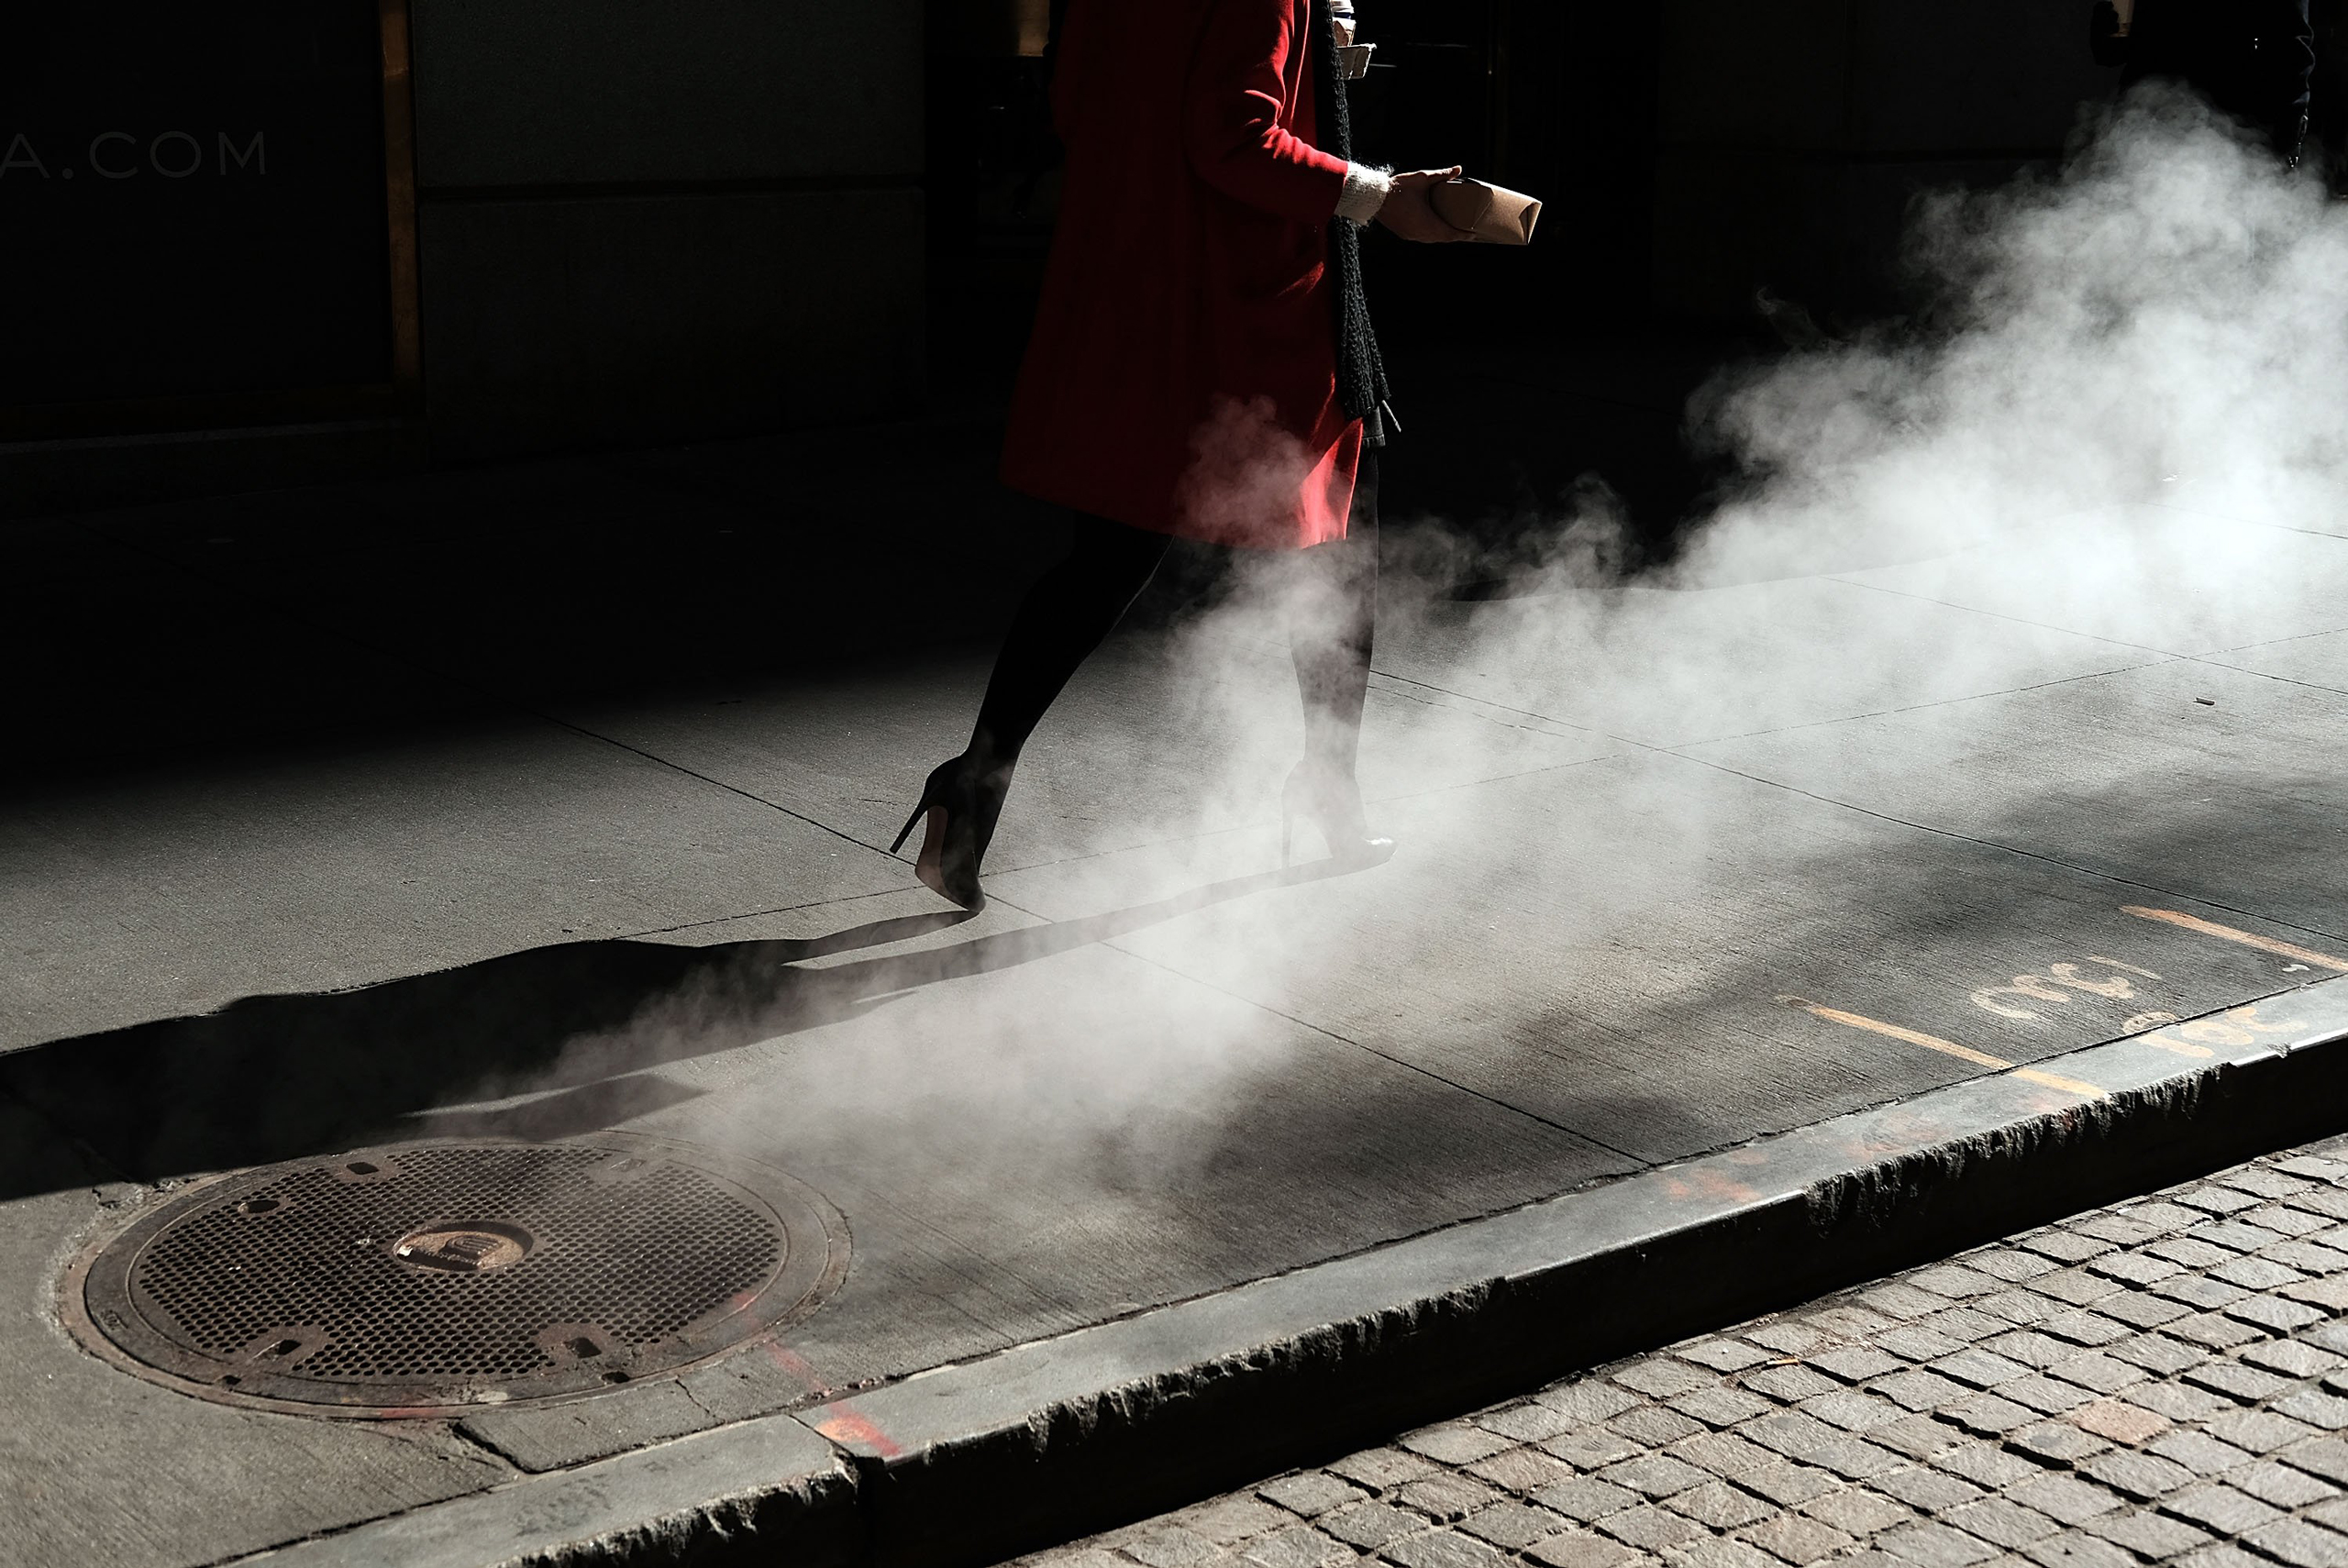 NEW YORK, NY - MARCH 21:  A woman walks by the New York Stock Exchange (NYSE) near Wall Street on March 21, 2016 in New York City. Following a strong week for US stocks, the Dow Jones industrial average was down slightly in morning trading.  (Photo by Spencer Platt/Getty Images) *** BESTPIX ***